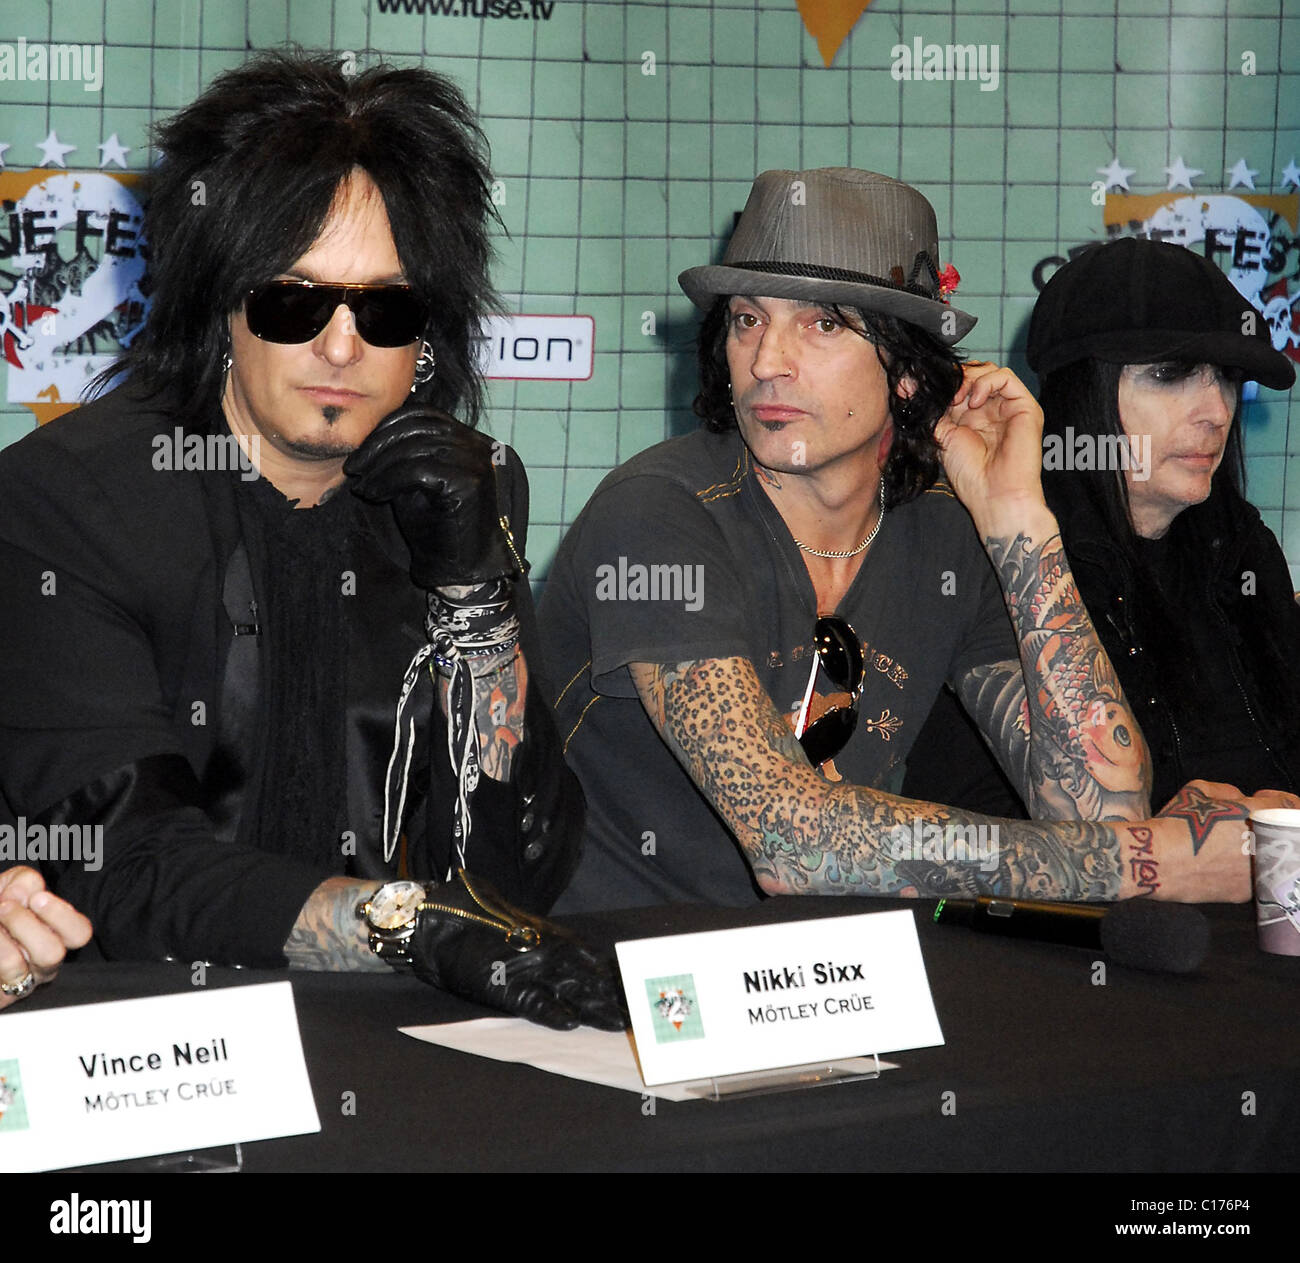 Nikki Sixx, Tommy Lee and Mick Mars, of Motley Crue attend the Crue Fest 2  line up press conference at Fuse studios New York Stock Photo - Alamy